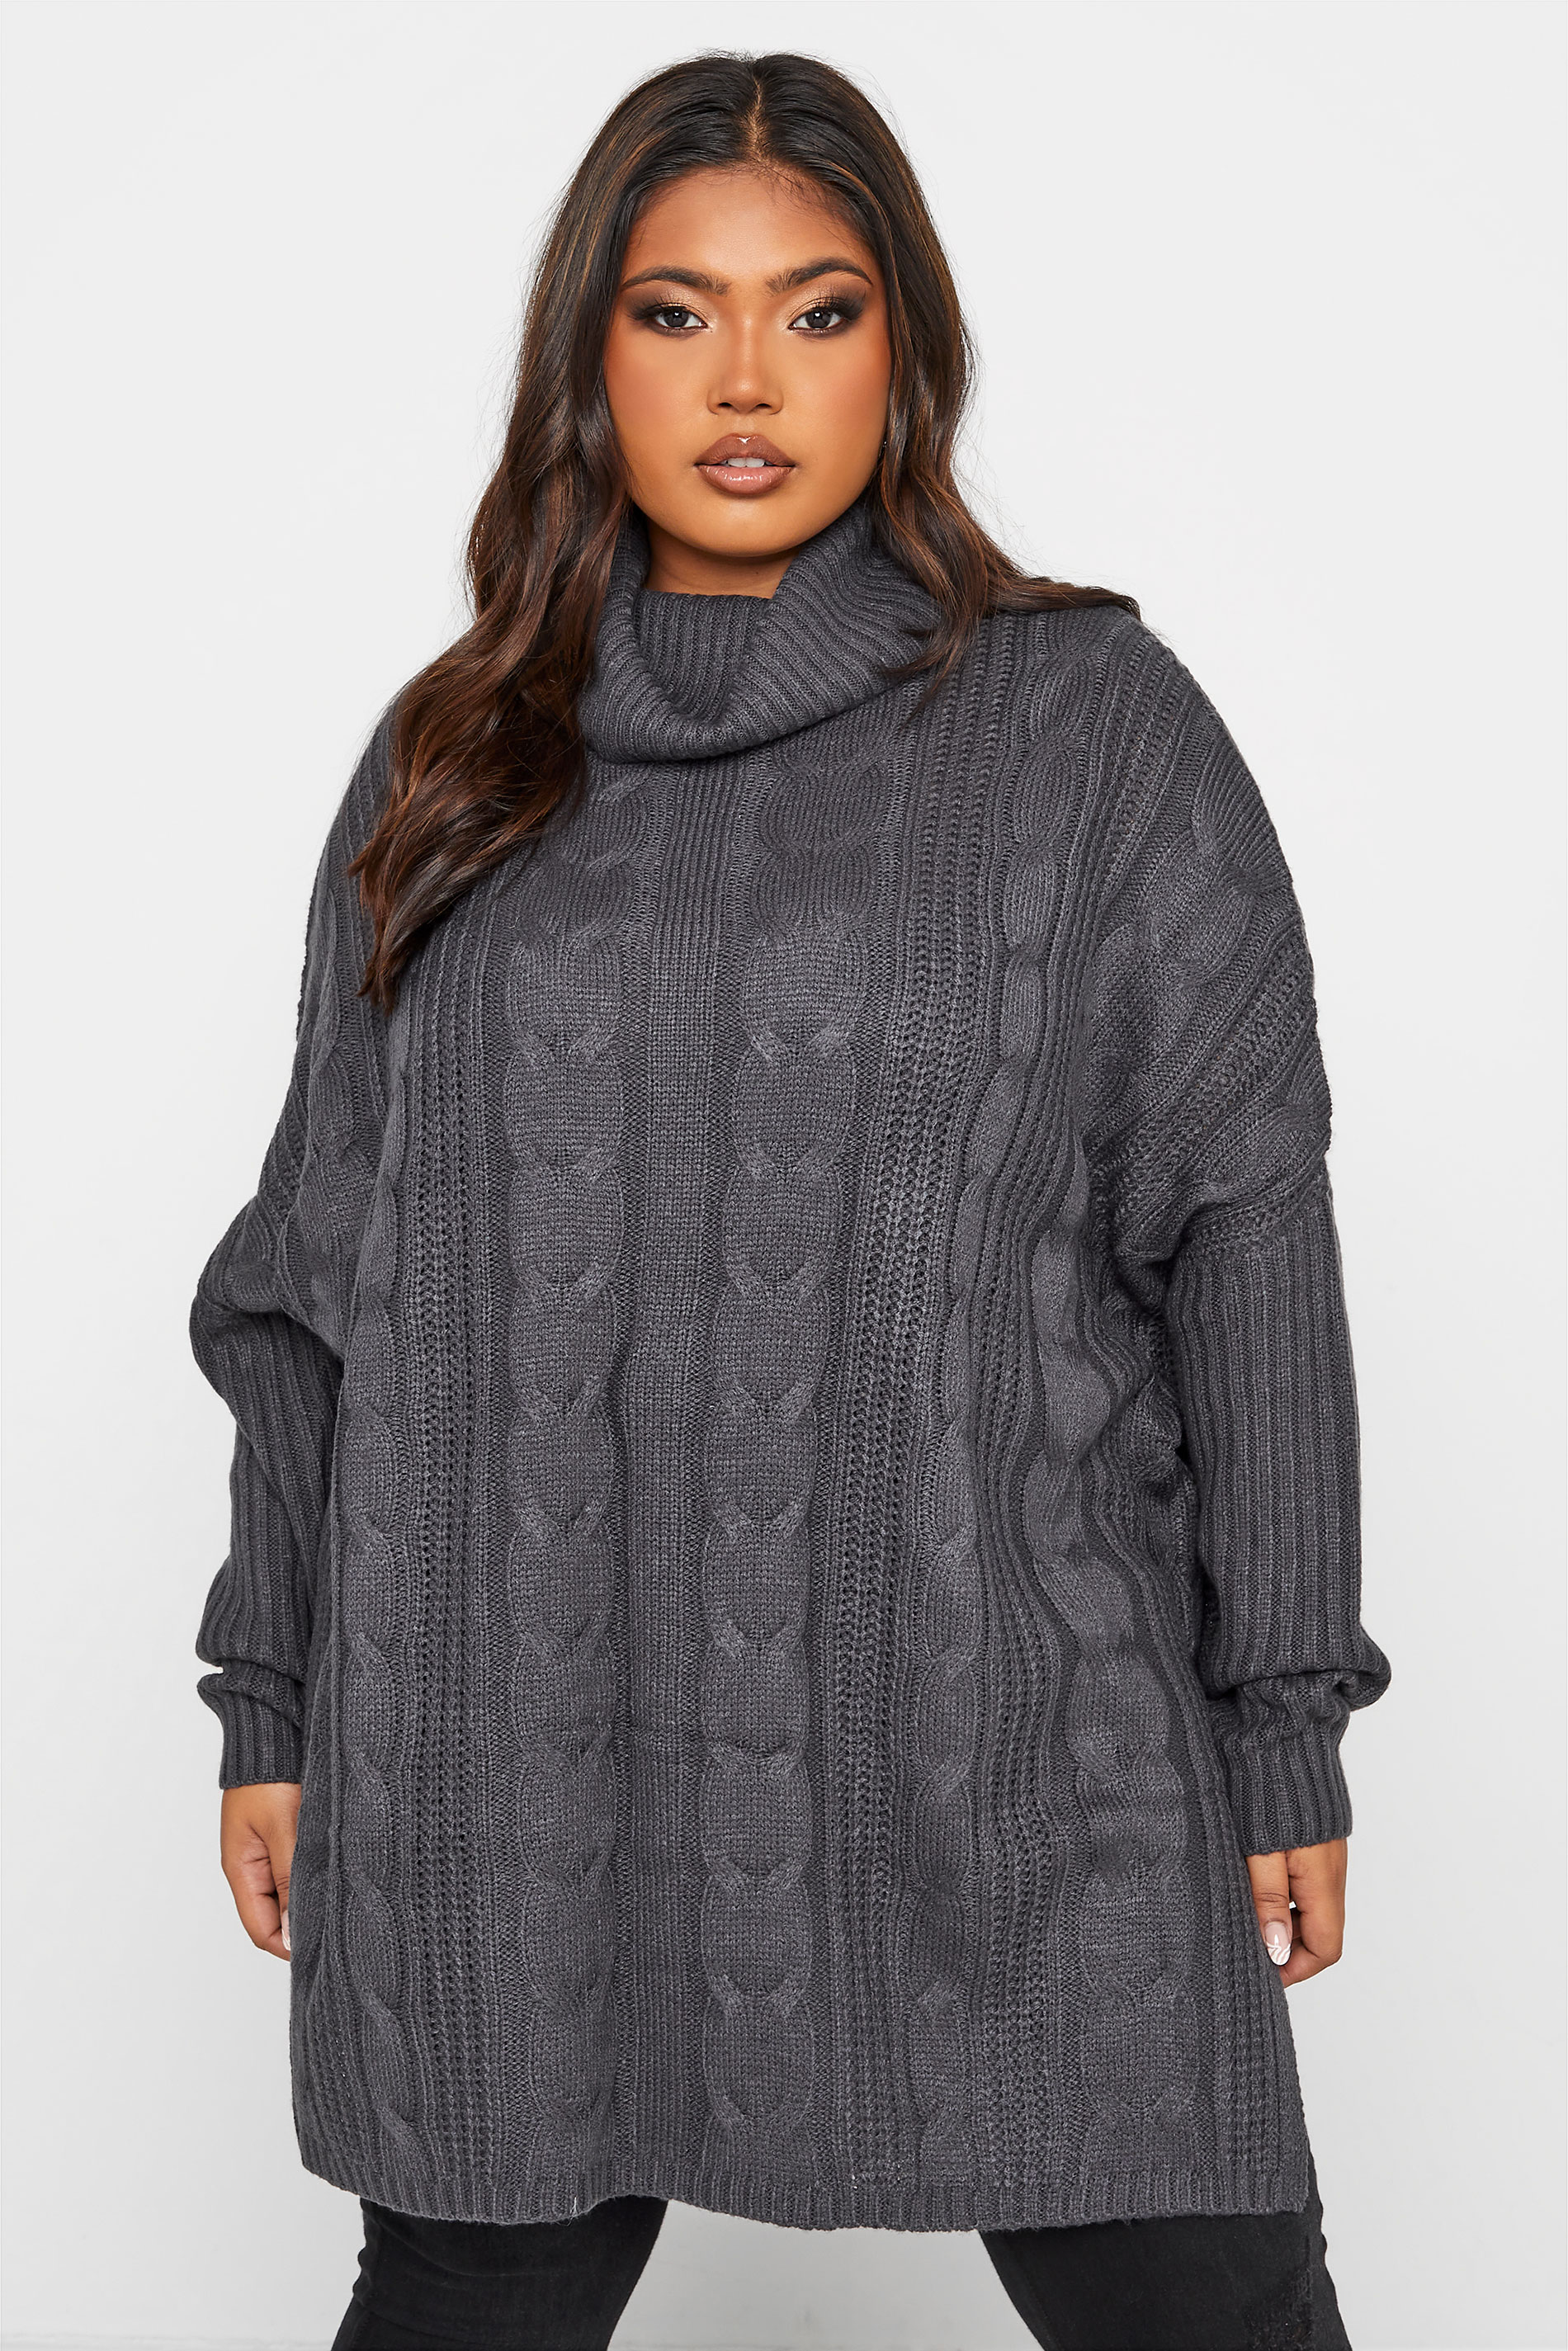 Charcoal Grey Cable Knit Roll Neck Jumper_A.jpg